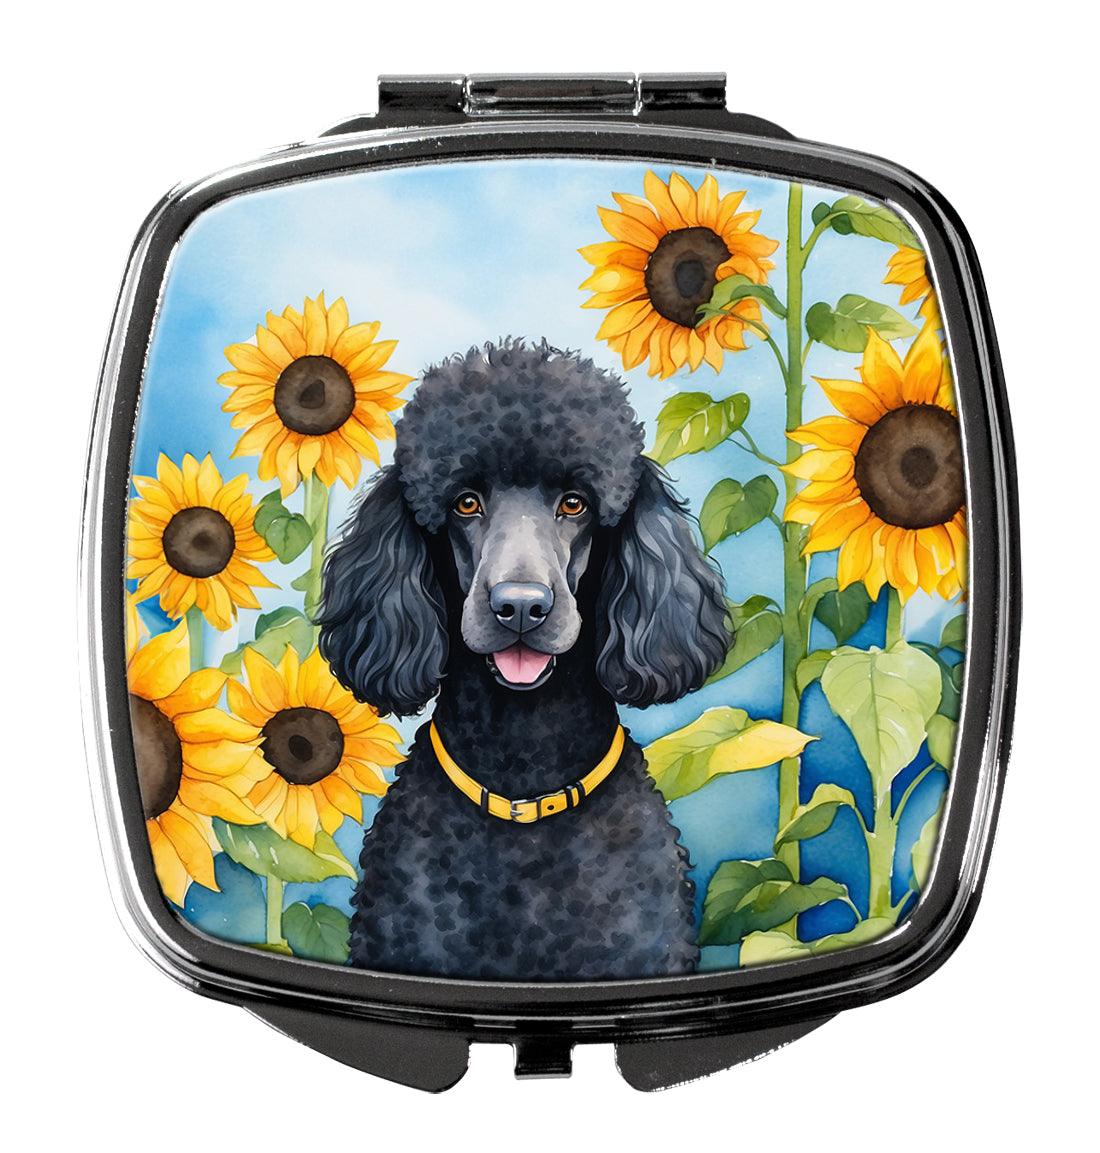 Buy this Black Poodle in Sunflowers Compact Mirror